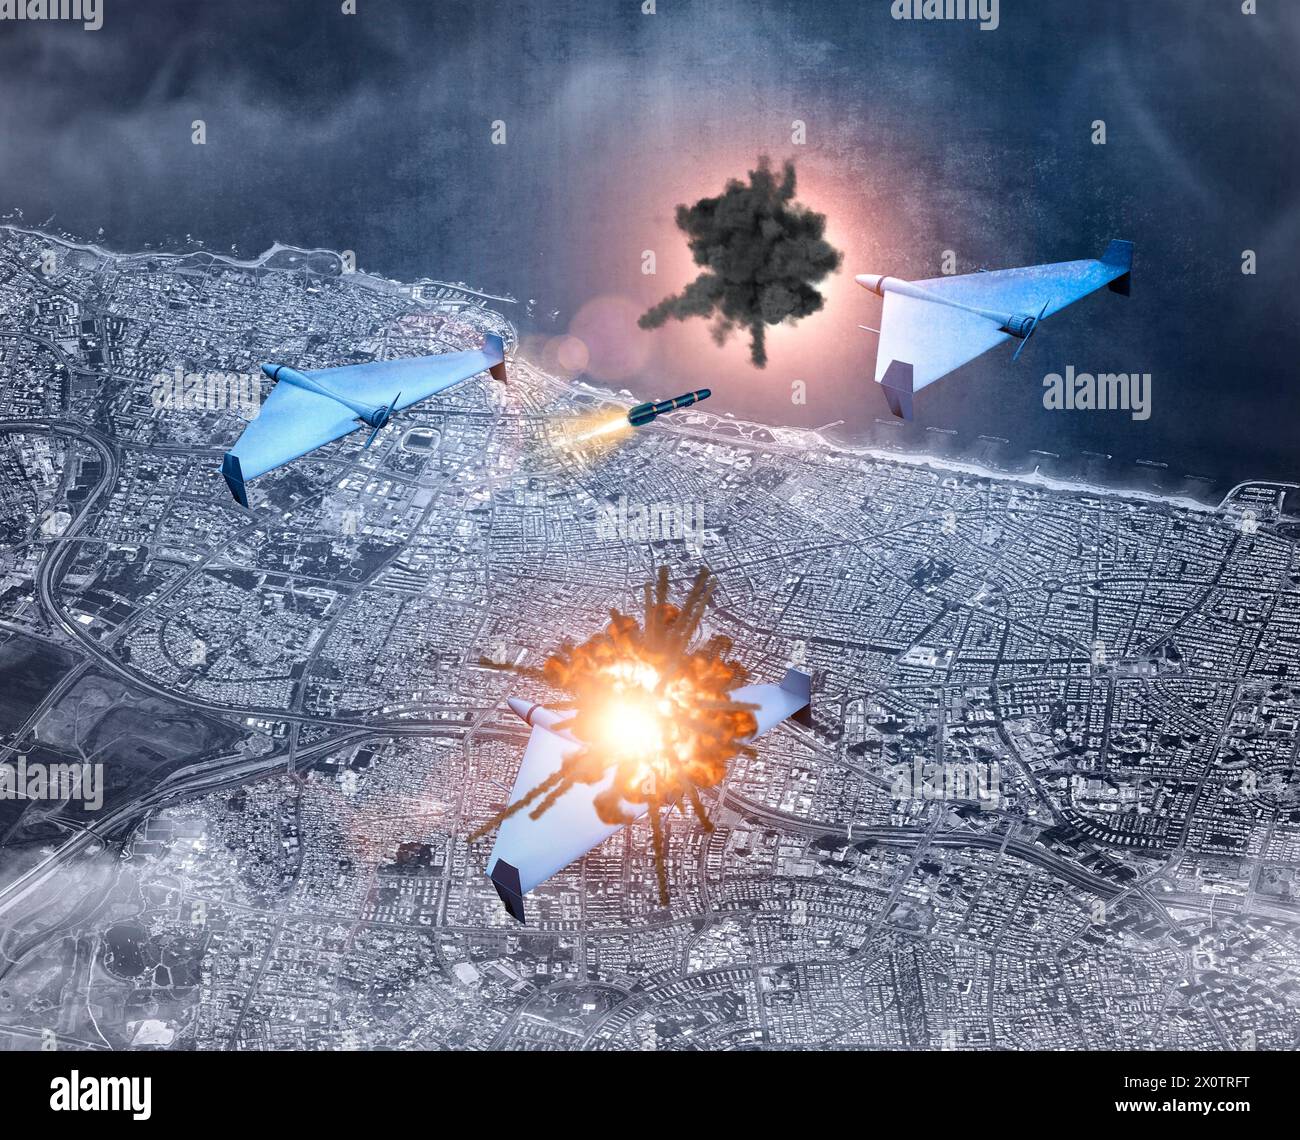 Iron Dome is a mobile air defense system. It is a system to protect Israel country from threats. The HESA Shahed 136. Drones flying at night Stock Photo